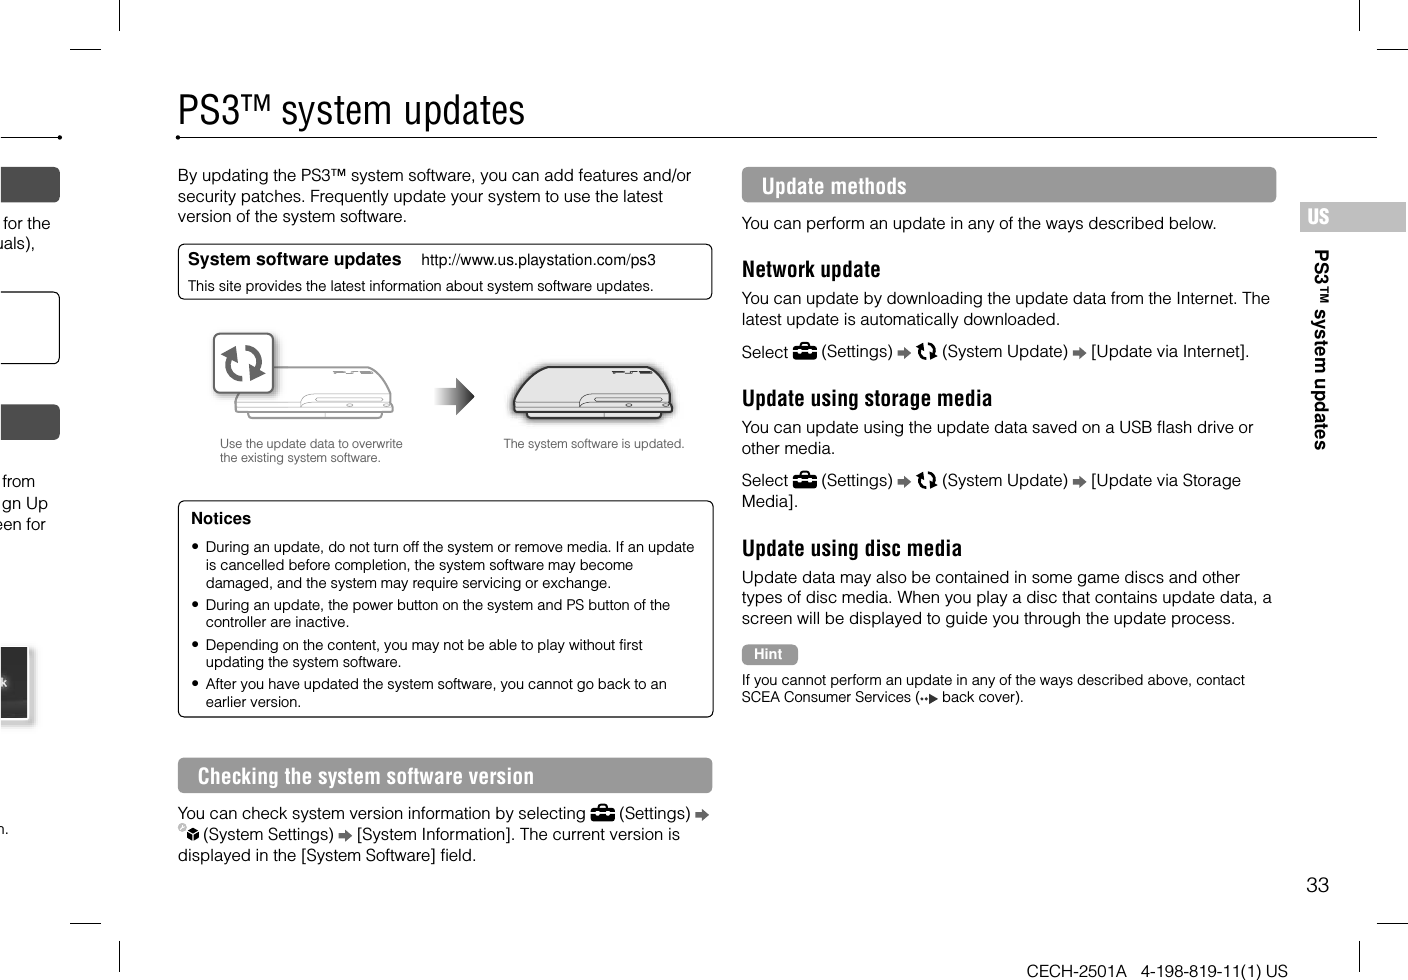 33CECH-2501A   4-198-819-11(1) USUSfor the uals), from gn Up een for n.PS3™ system updatesPS3™ system updatesBy updating the PS3™ system software, you can add features and/or security patches. Frequently update your system to use the latest version of the system software.System software updates     http://www.us.playstation.com/ps3This site provides the latest information about system software updates.Use the update data to overwrite the existing system software.The system software is updated.Notices During an update, do not turn off the system or remove media. If an update is cancelled before completion, the system software may become damaged, and the system may require servicing or exchange. During an update, the power button on the system and PS button of the controller are inactive. Depending on the content, you may not be able to play without first updating the system software. After you have updated the system software, you cannot go back to an earlier version.Checking the system software versionYou can check system version information by selecting   (Settings)    (System Settings)   [System Information]. The current version is displayed in the [System Software] field.Update methodsYou can perform an update in any of the ways described below.Network updateYou can update by downloading the update data from the Internet. The latest update is automatically downloaded.Select   (Settings)     (System Update)   [Update via Internet].Update using storage mediaYou can update using the update data saved on a USB flash drive or other media.Select   (Settings)     (System Update)   [Update via Storage Media].Update using disc mediaUpdate data may also be contained in some game discs and other types of disc media. When you play a disc that contains update data, a screen will be displayed to guide you through the update process.HintIf you cannot perform an update in any of the ways described above, contact SCEA Consumer Services (  back cover).